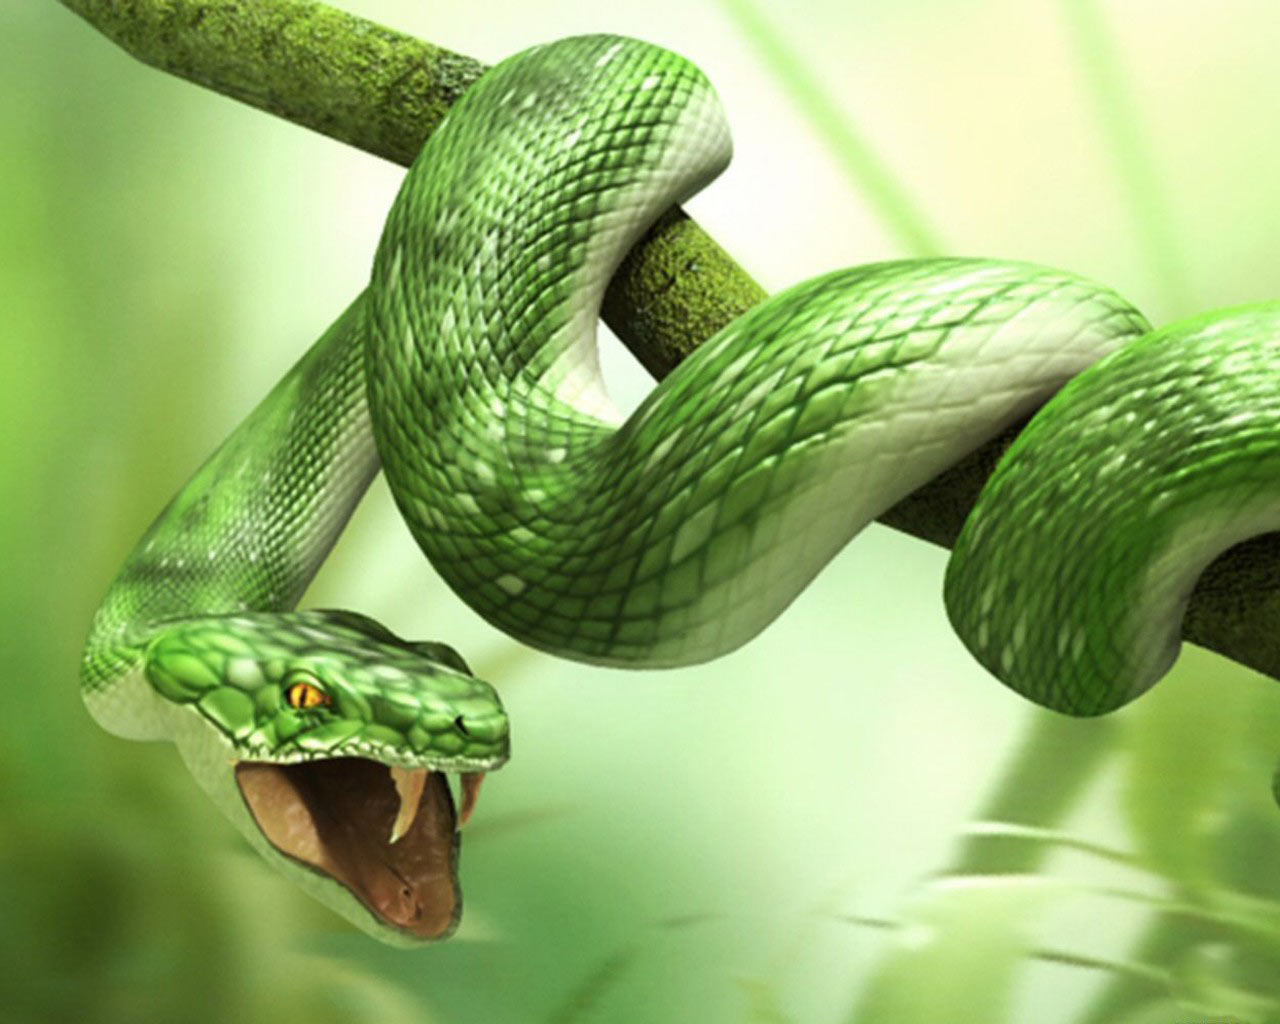 snake hd wallpapers snake for raccoon hd wallpapers snake wallpapers